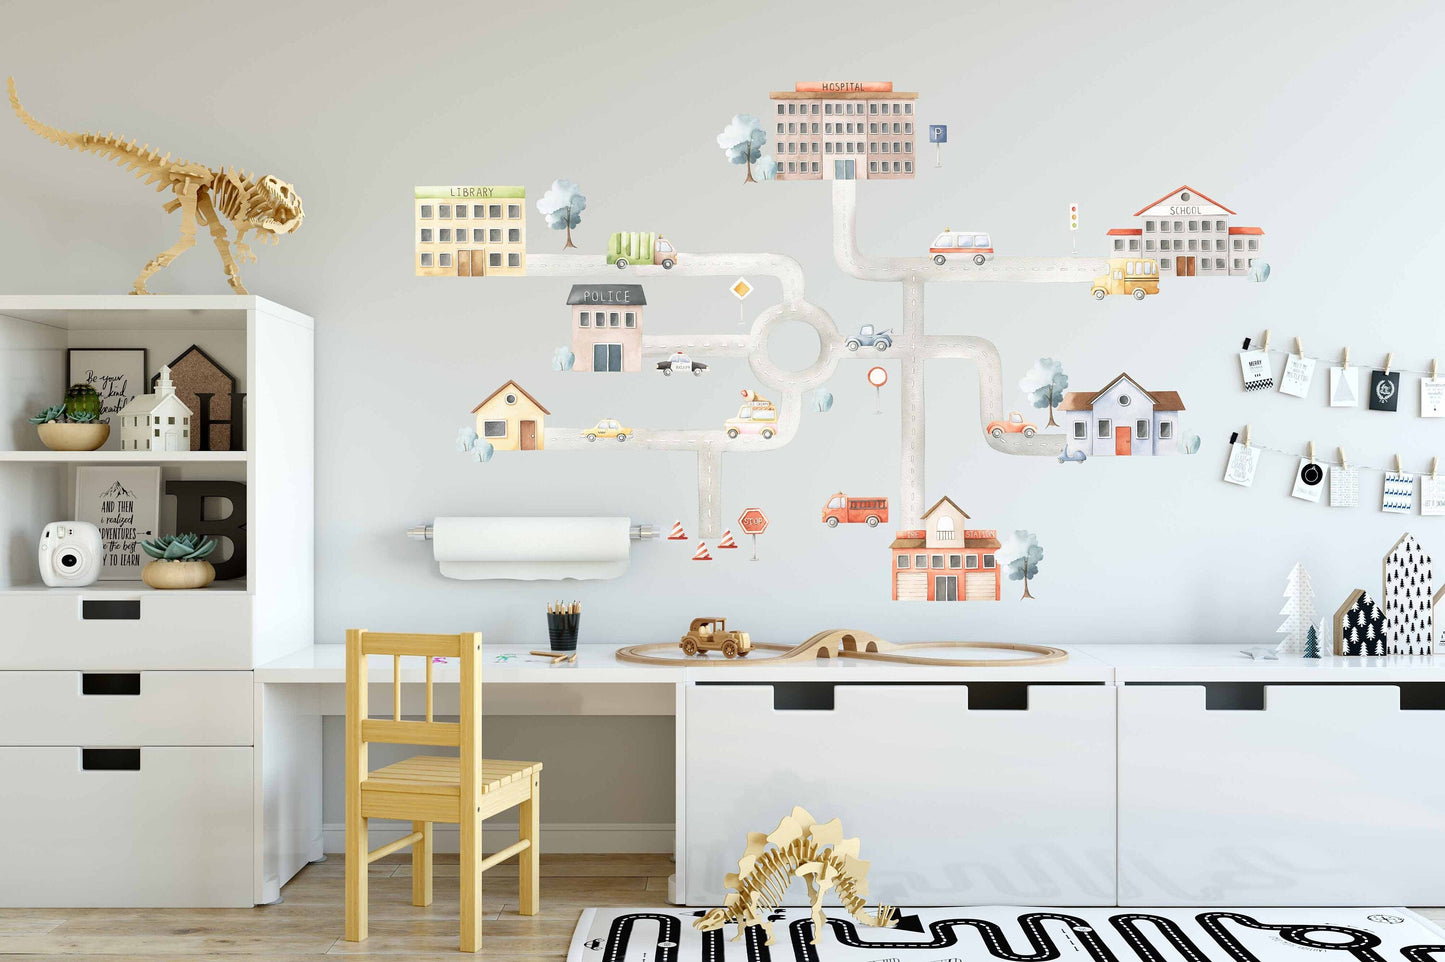 Car Wall Decals Stickers Road City Houses, LF208